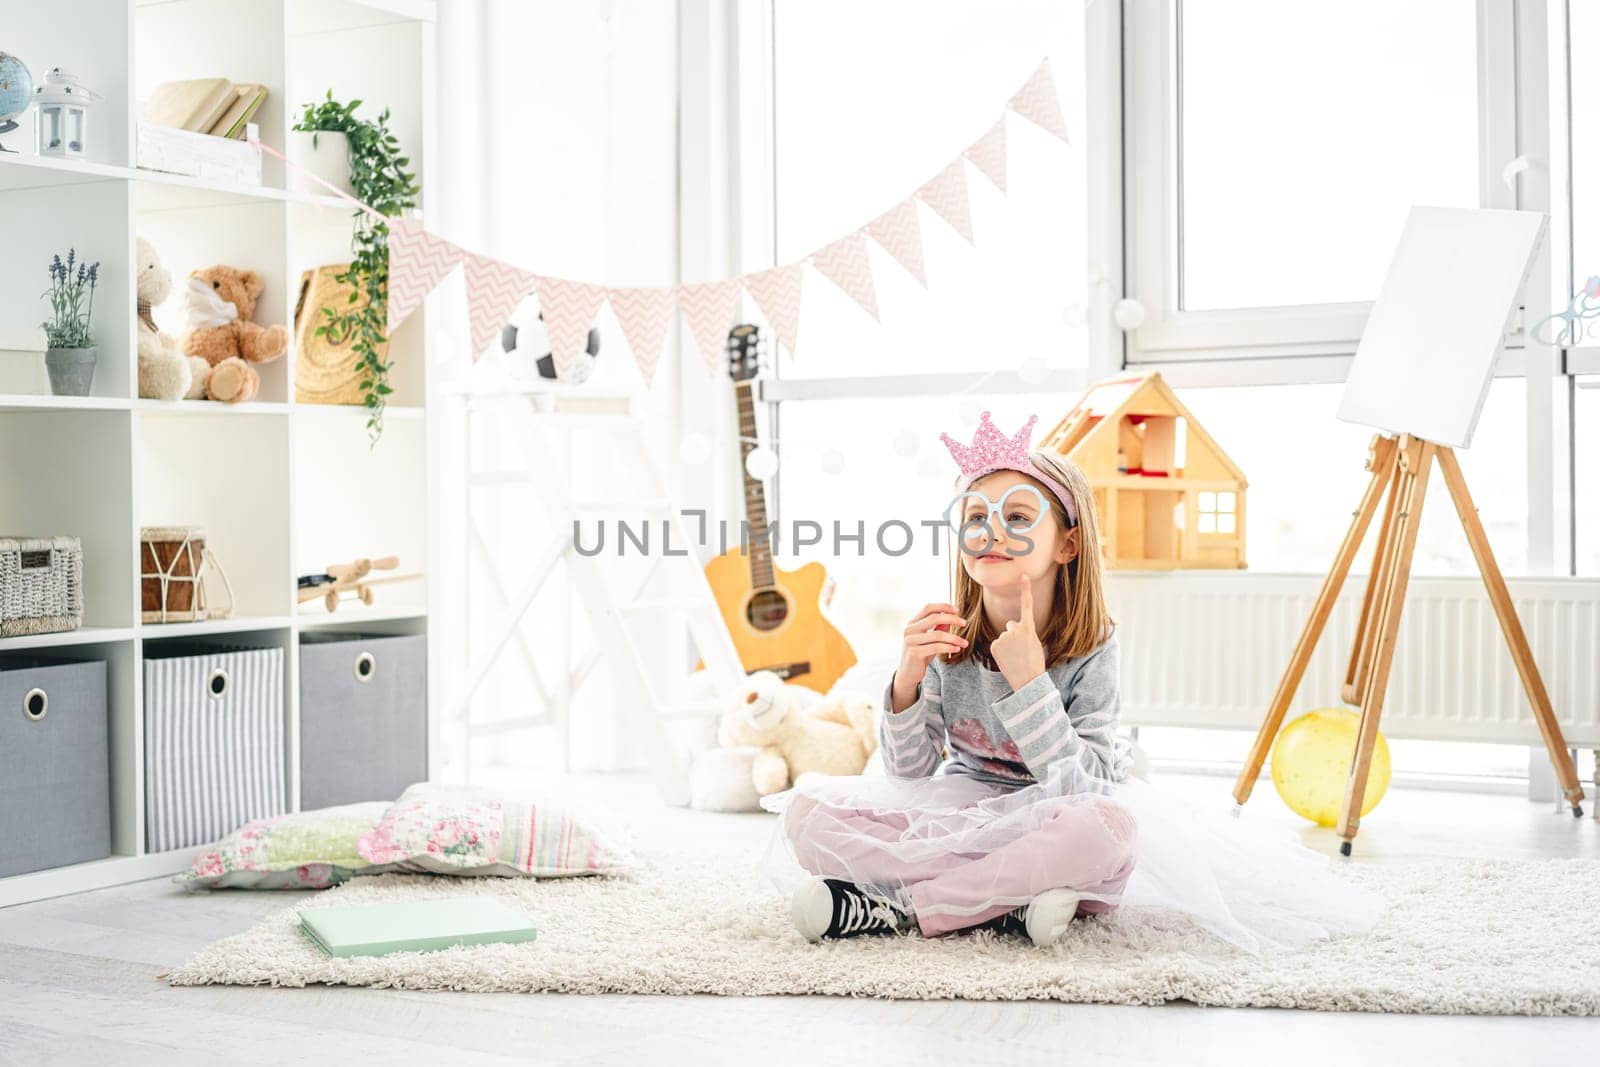 Pretty little girl playing with paper glasses in bright room